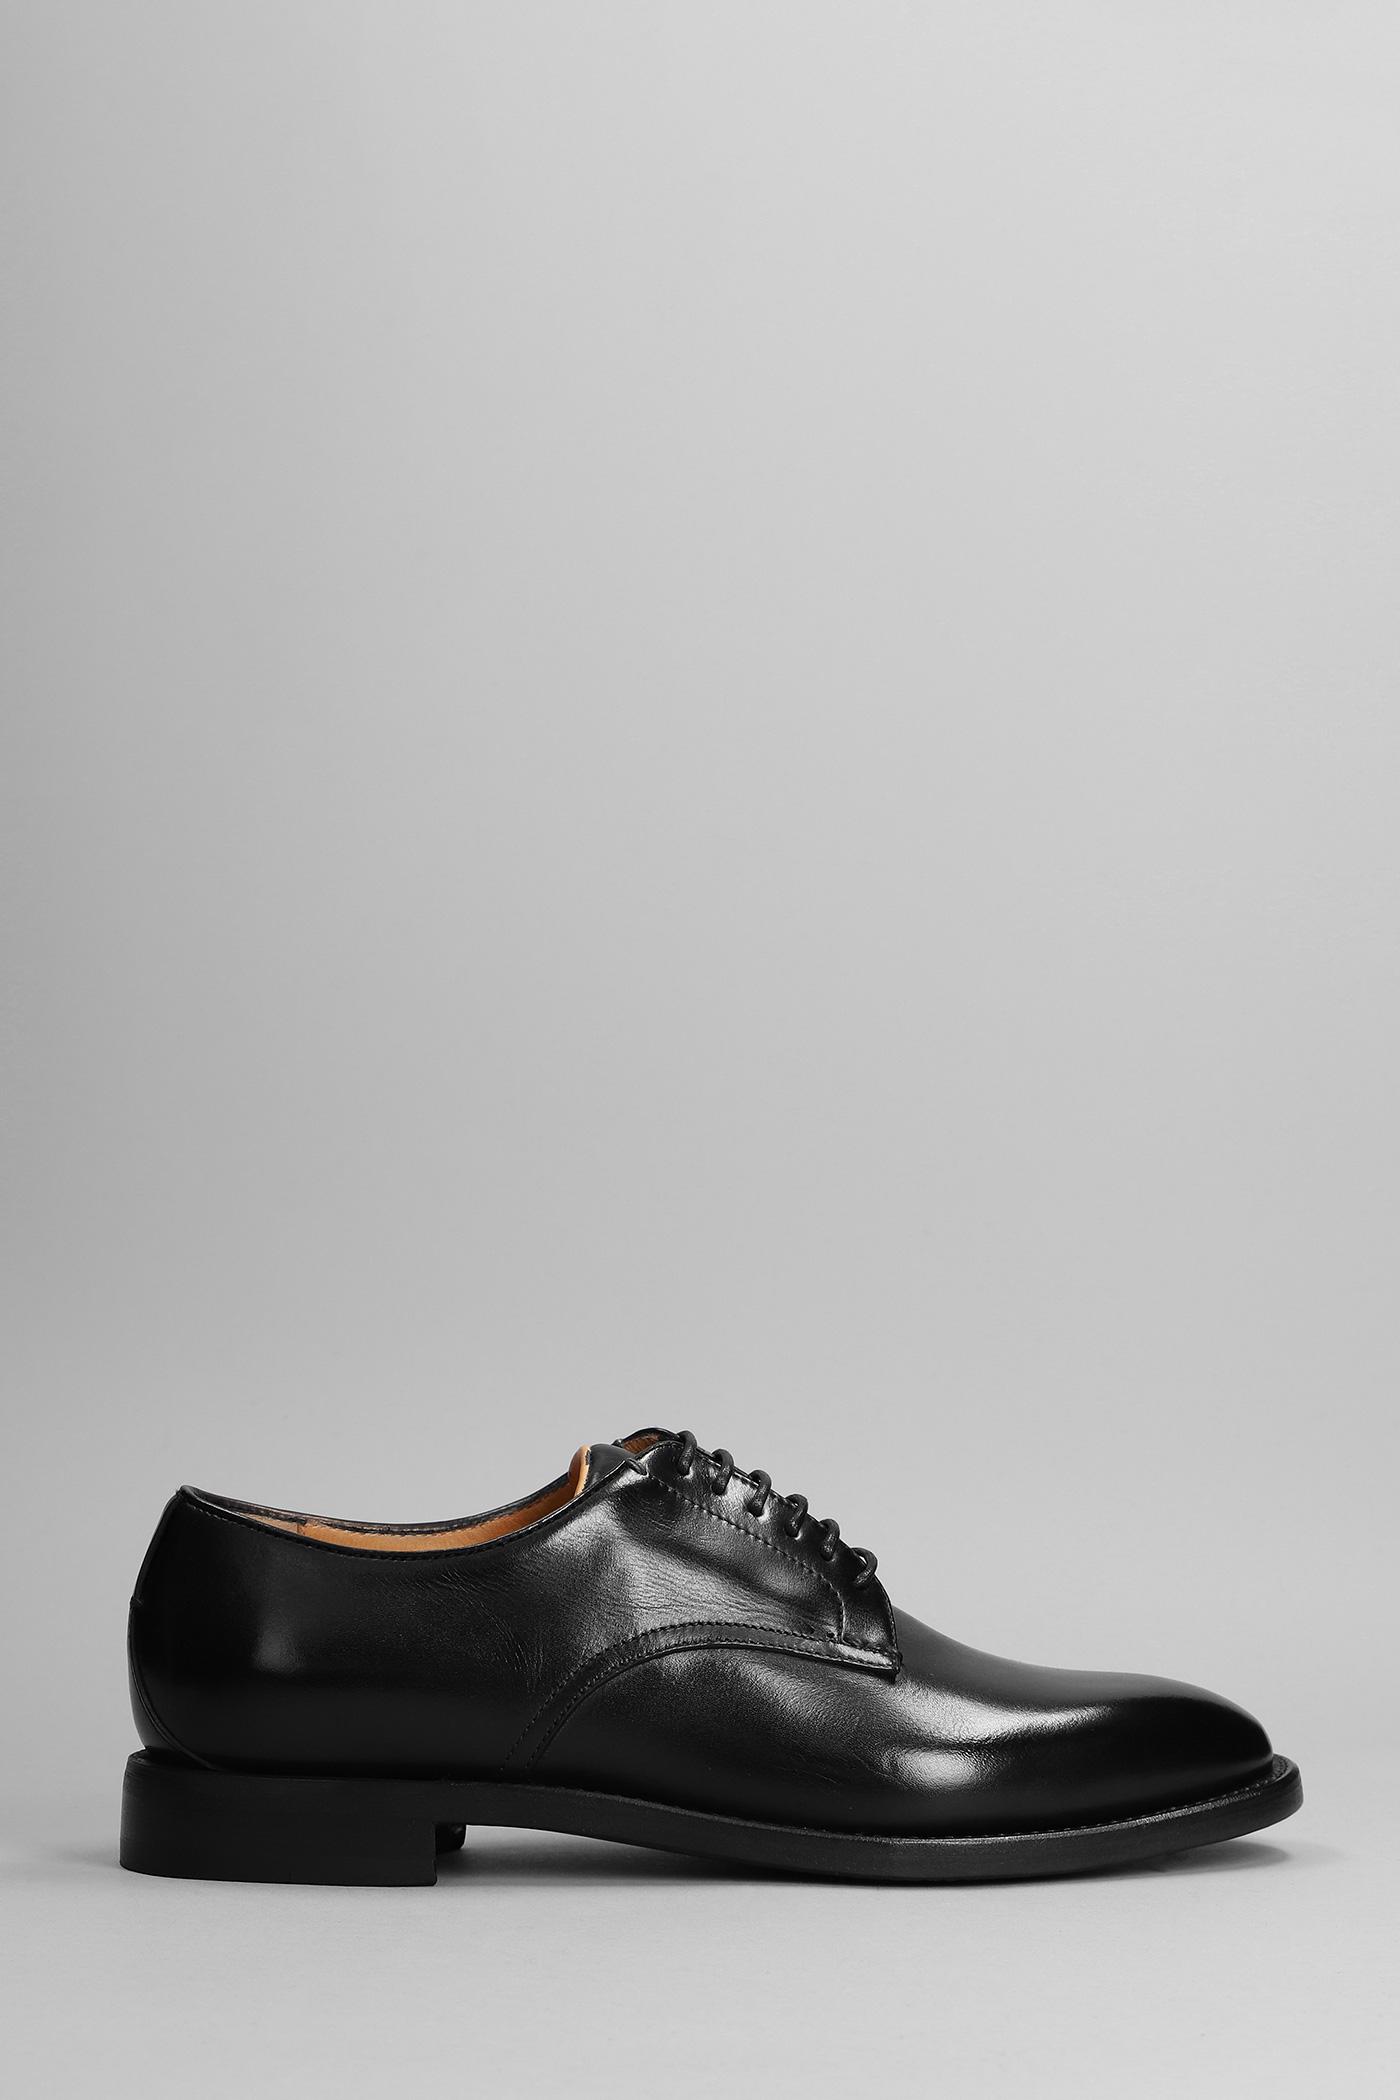 Silvano Sassetti Lace Up Shoes In Black Leather in Gray for Men | Lyst